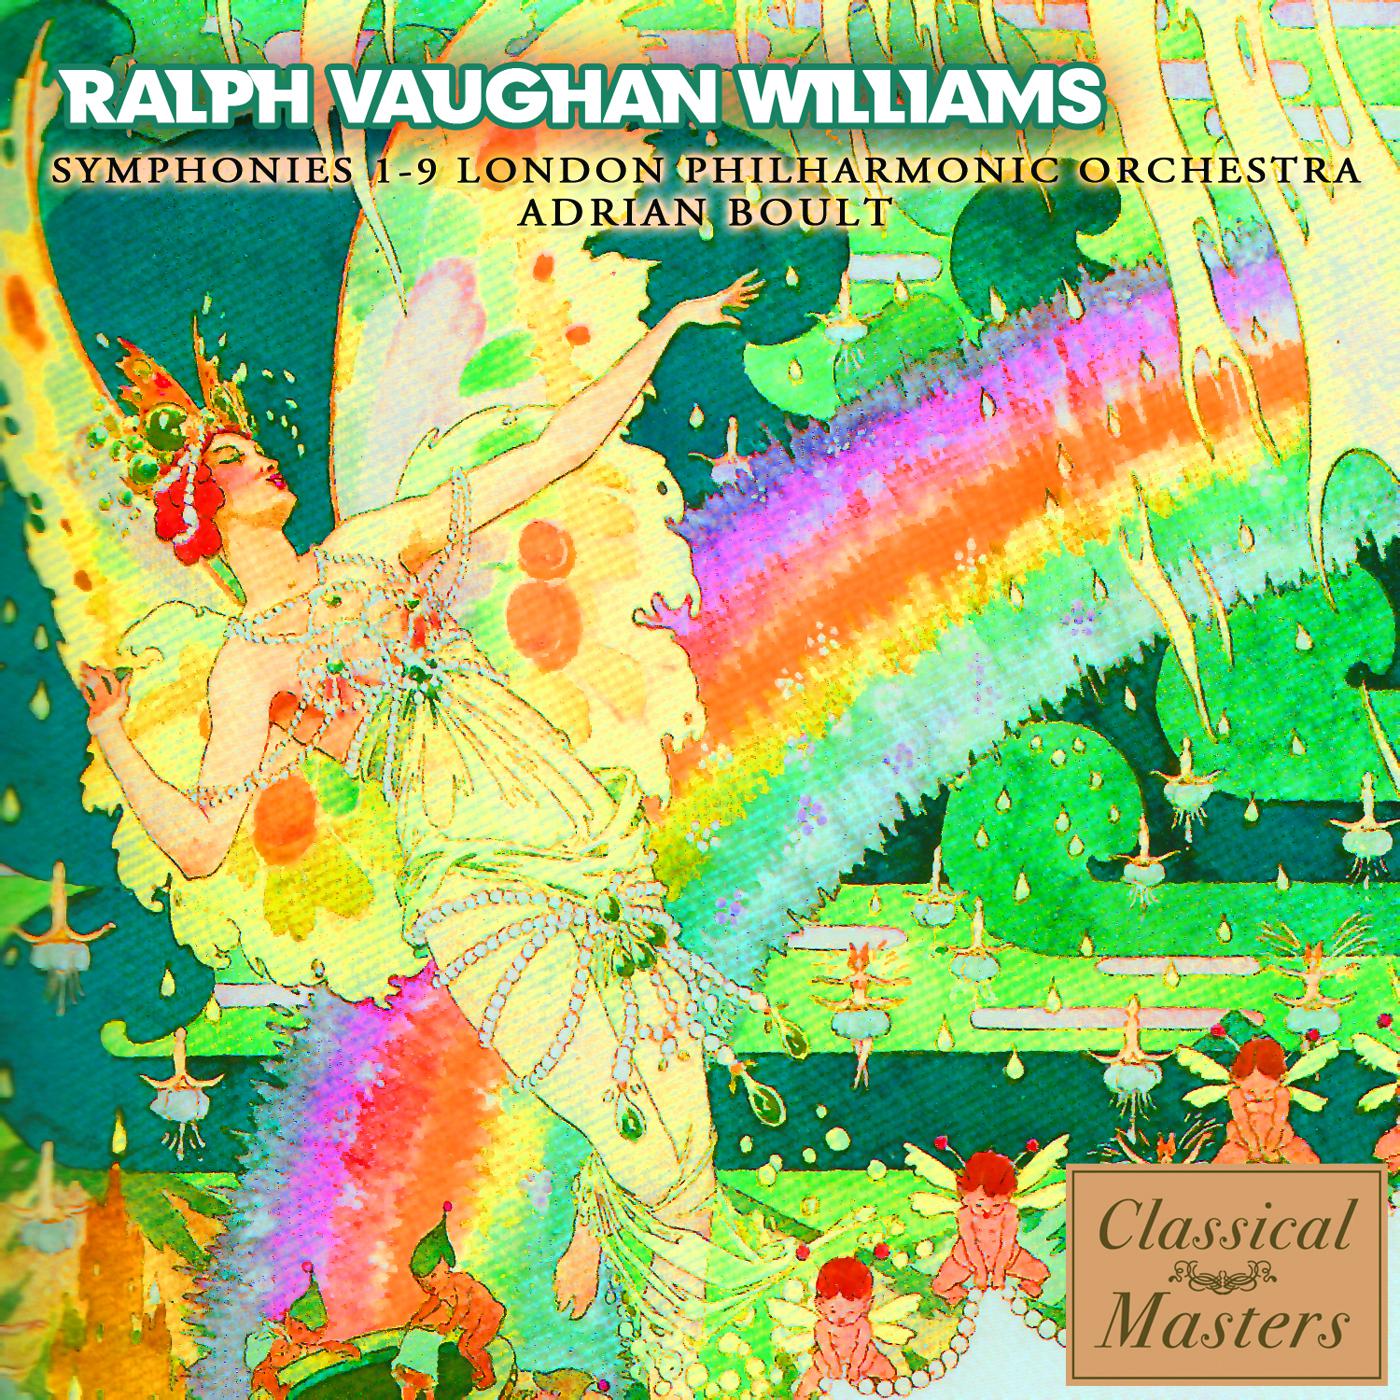 Symphony No.6 in E minor - Speech by Vaughan Williams